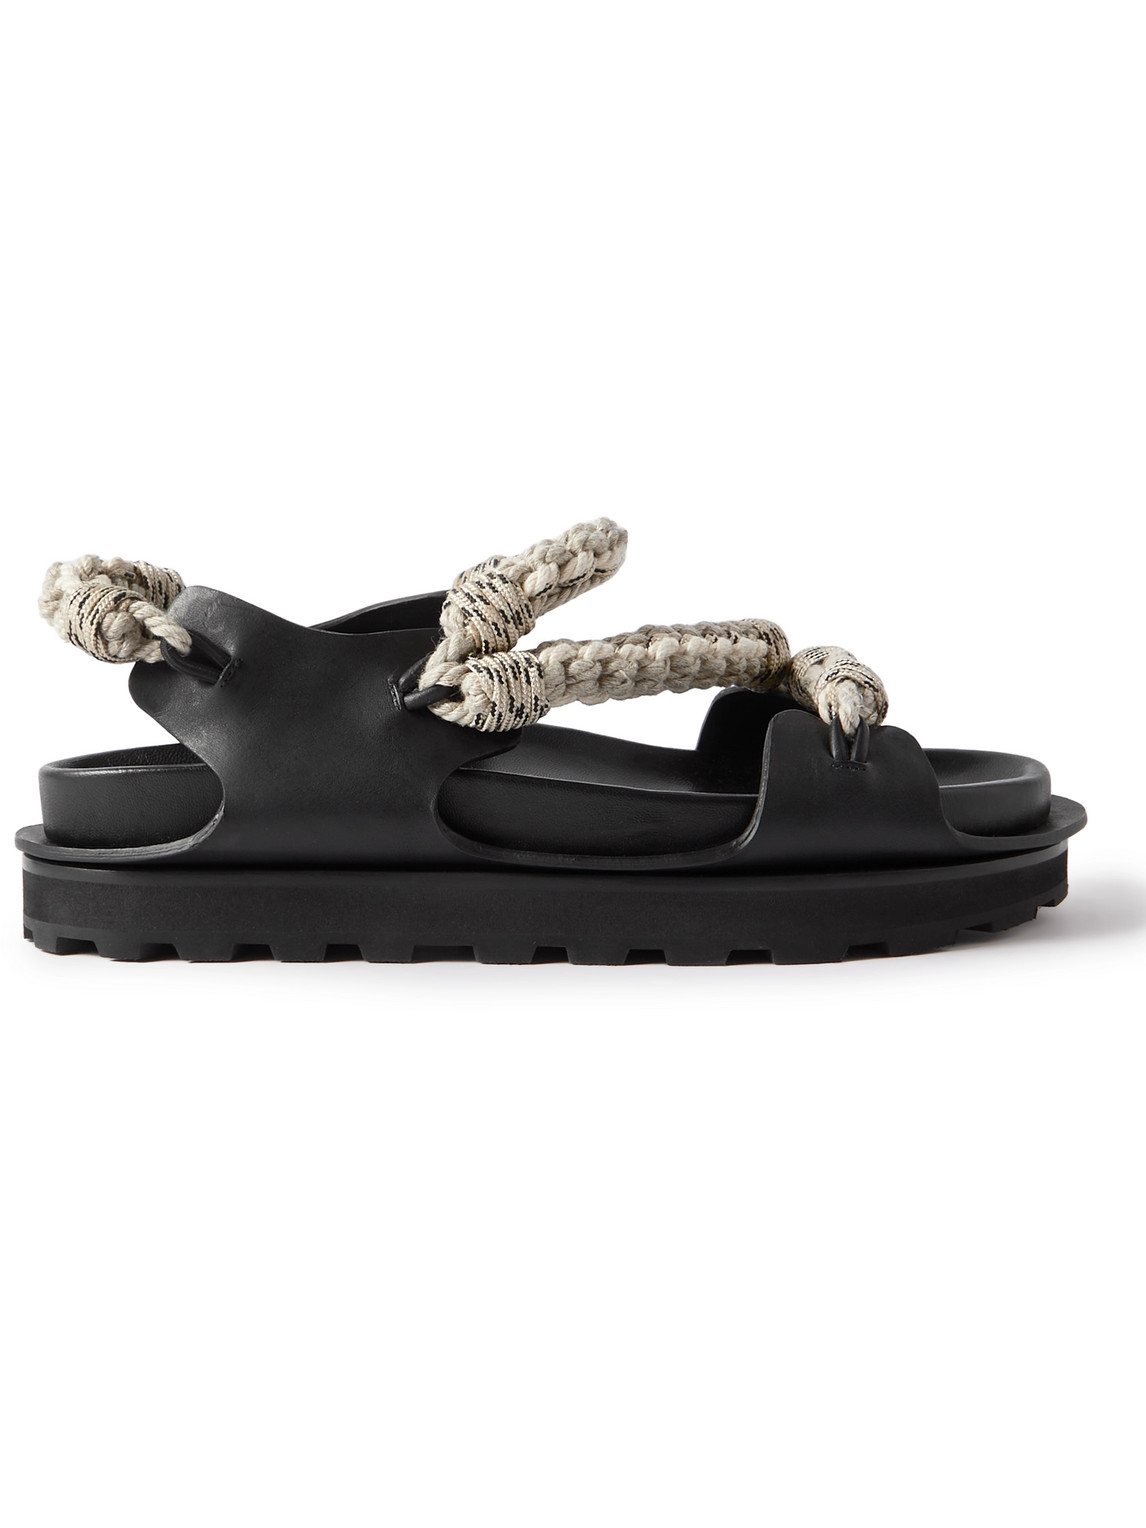 JIL SANDER LEATHER AND ROPE SANDALS